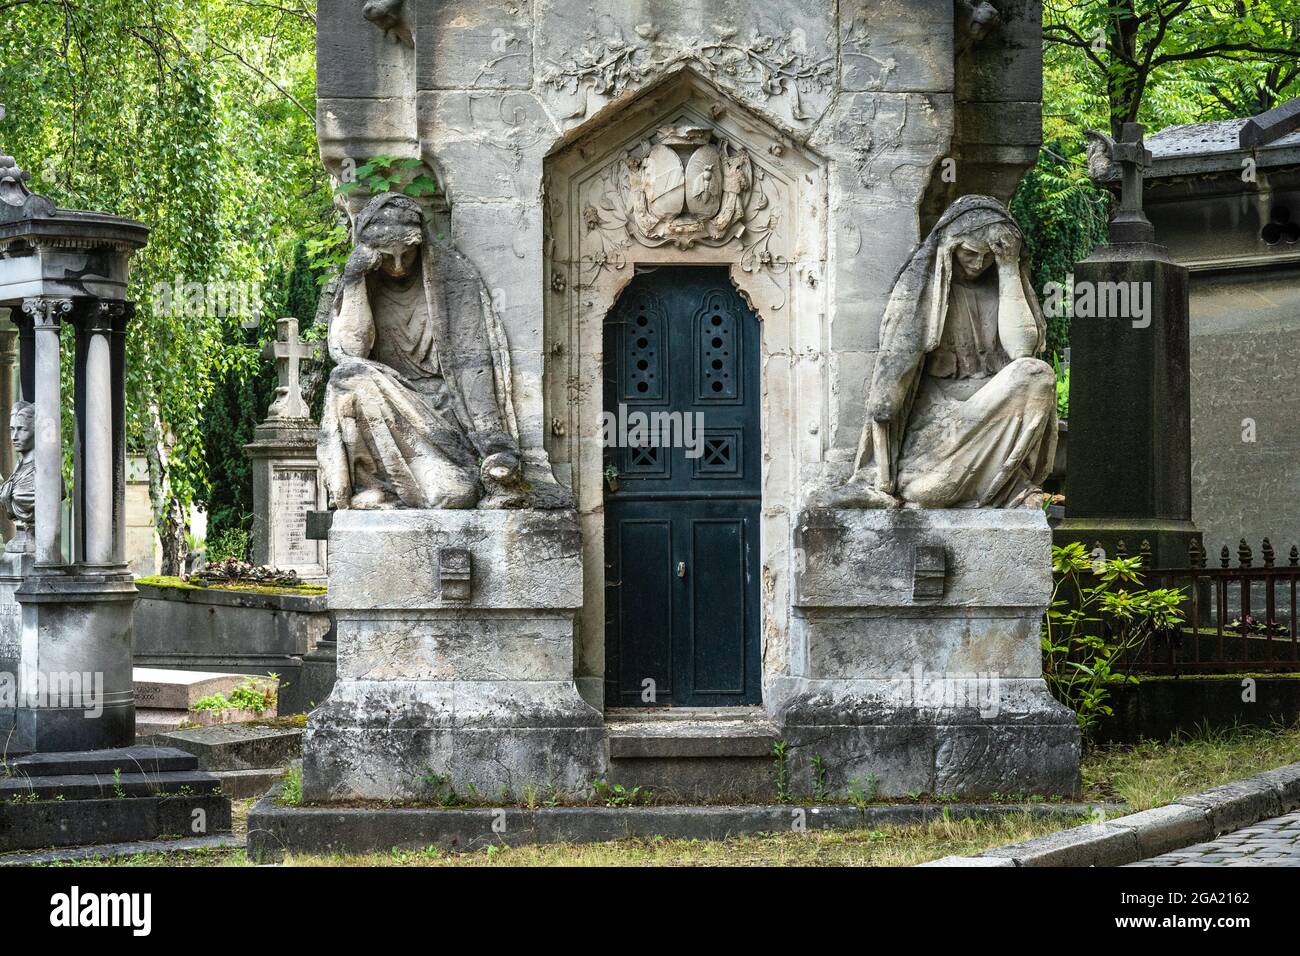 Pere Lachaise Cemetery is the largest cemetery in Paris, France. Stock Photo